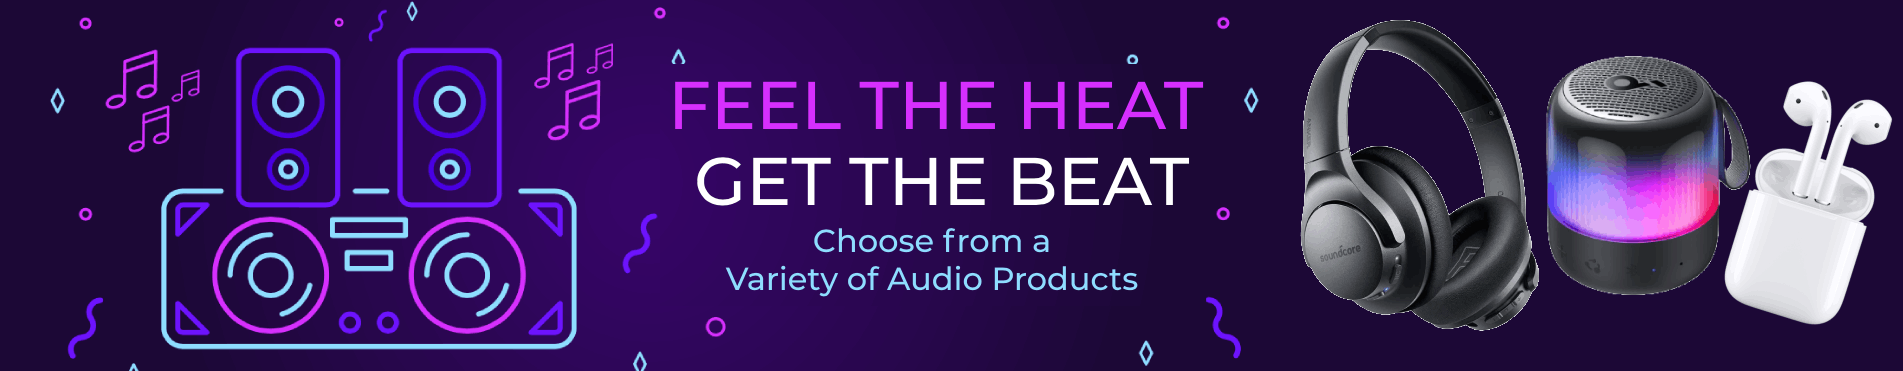 Feel the Heat - Get the Beat ! Best deals on audio products only on tecneek